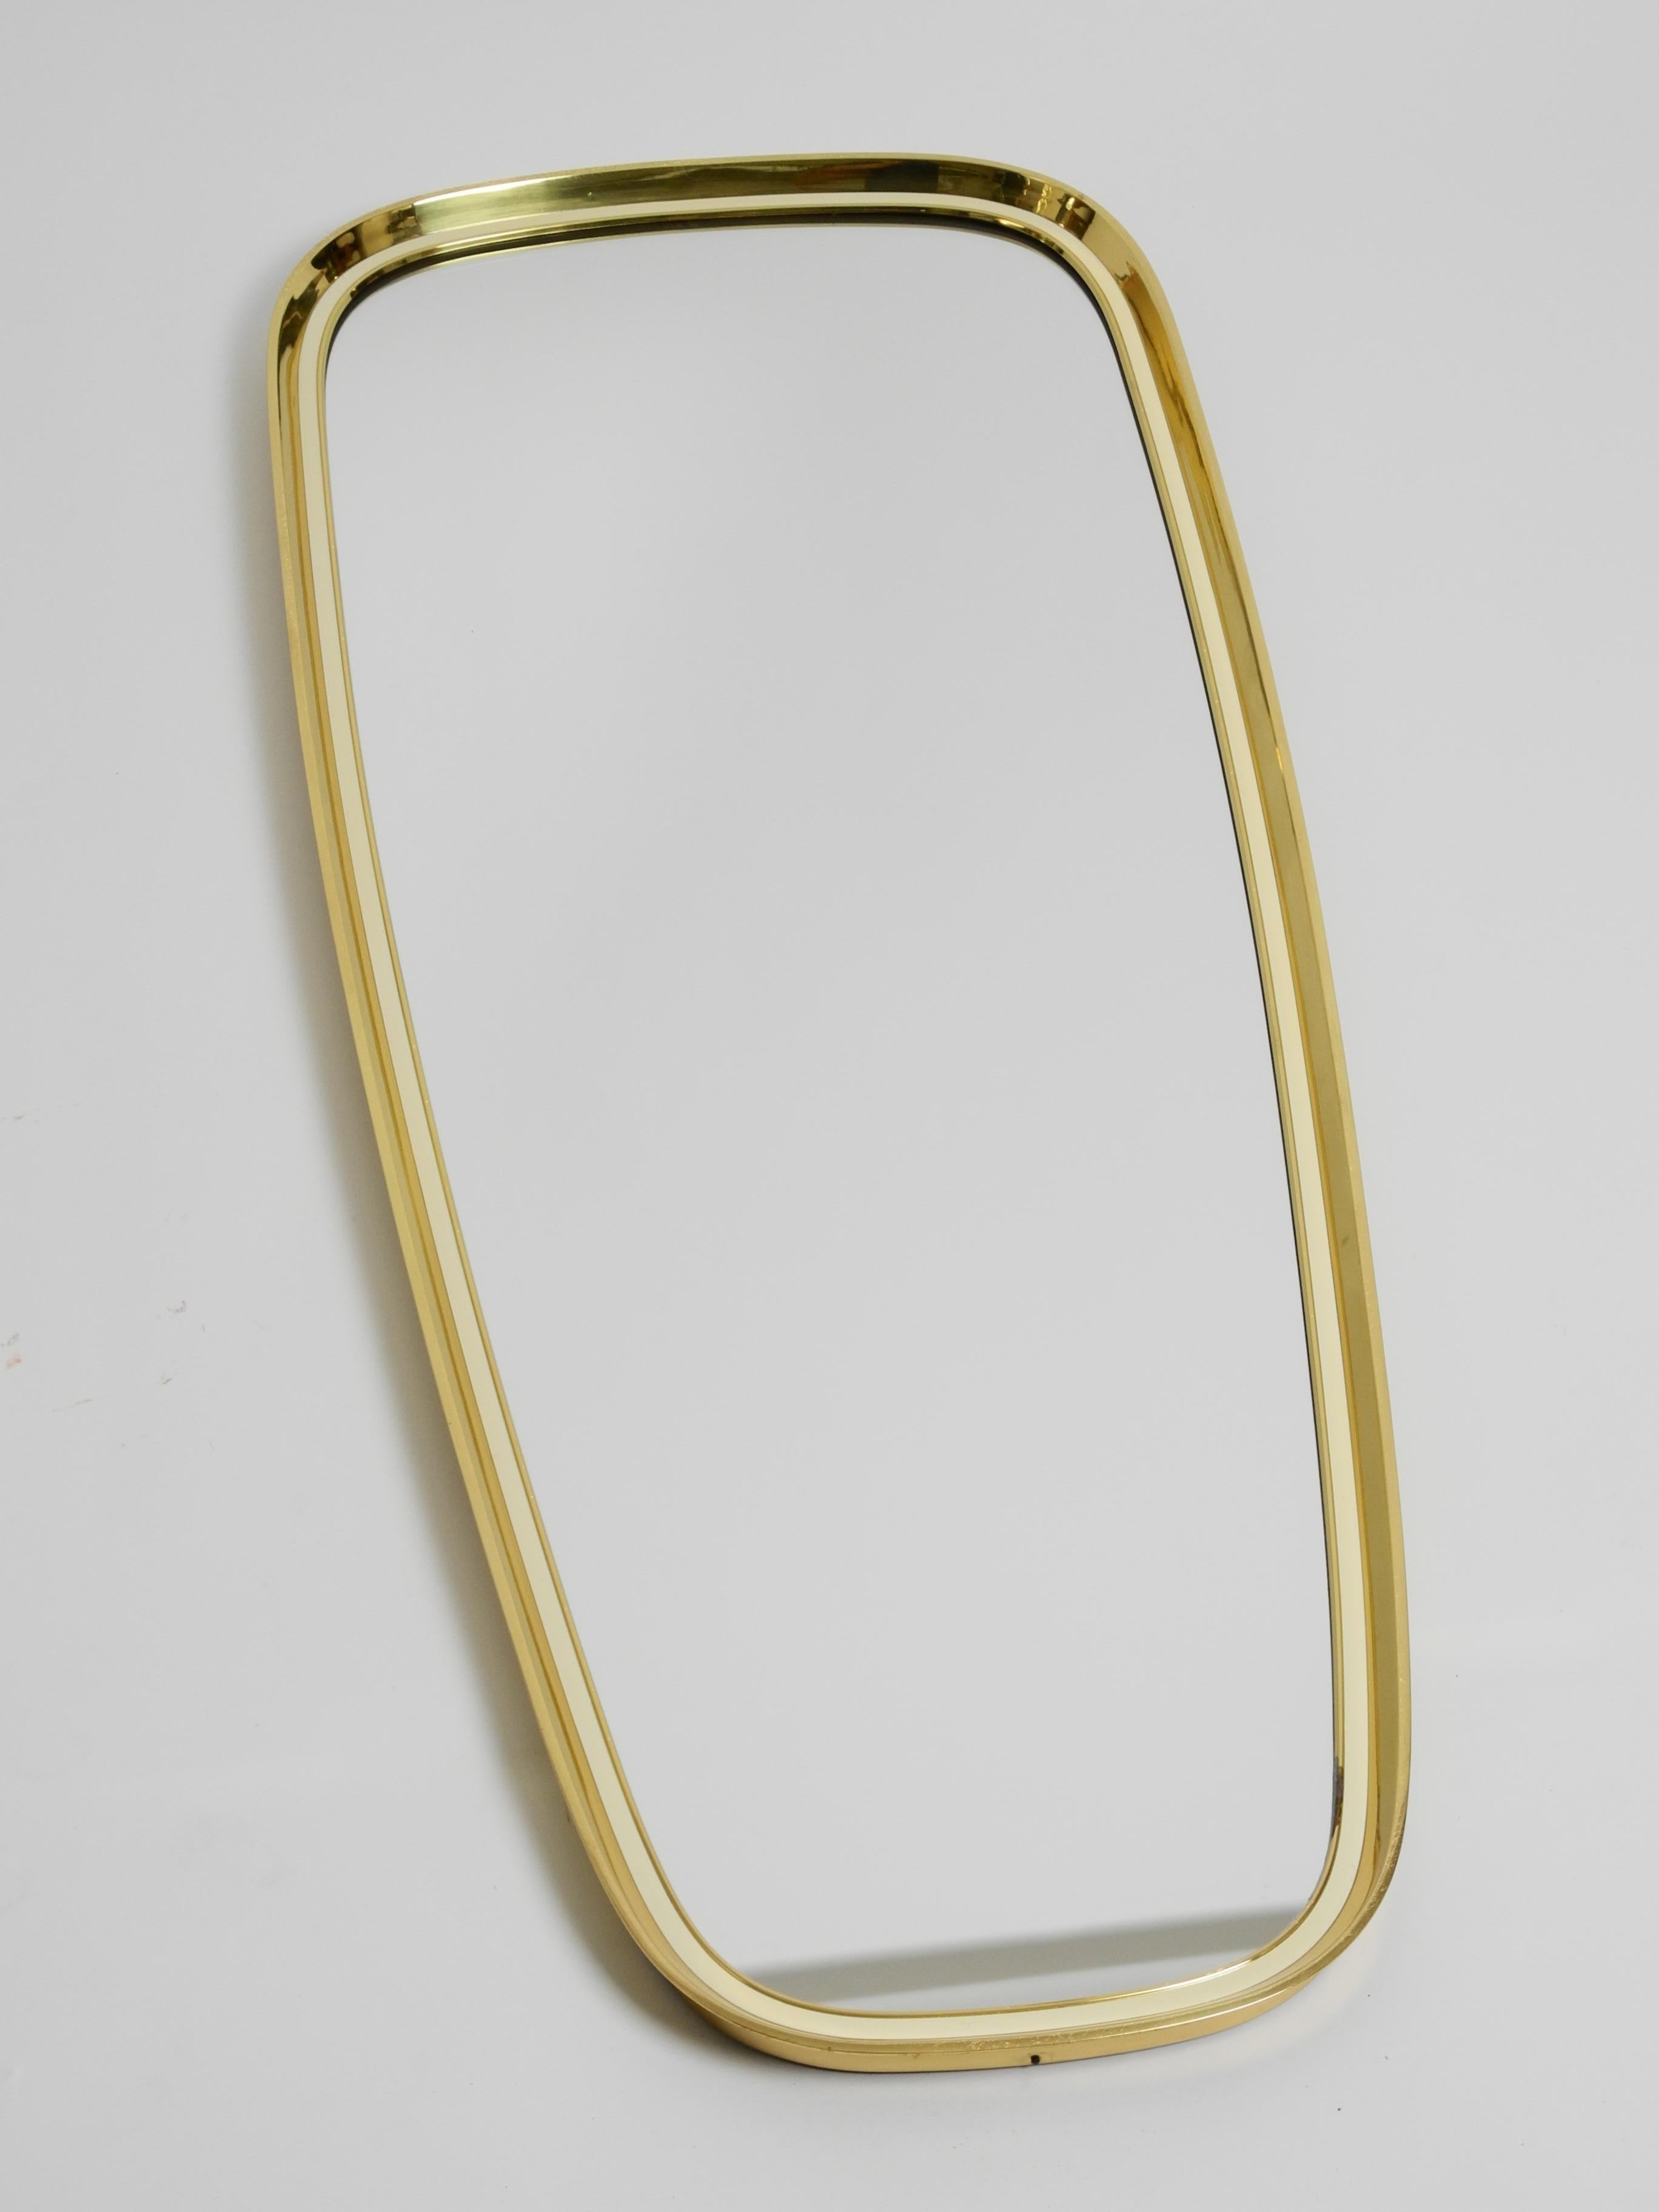 Extraordinary heavy large mid-century brass wall mirror by Münchner Zierspiegel, made in Germany.

Great 1950s minimalistic elegant design. Very high quality production. Heavy and very solidly built. An unusually thick, continuous brass frame, which